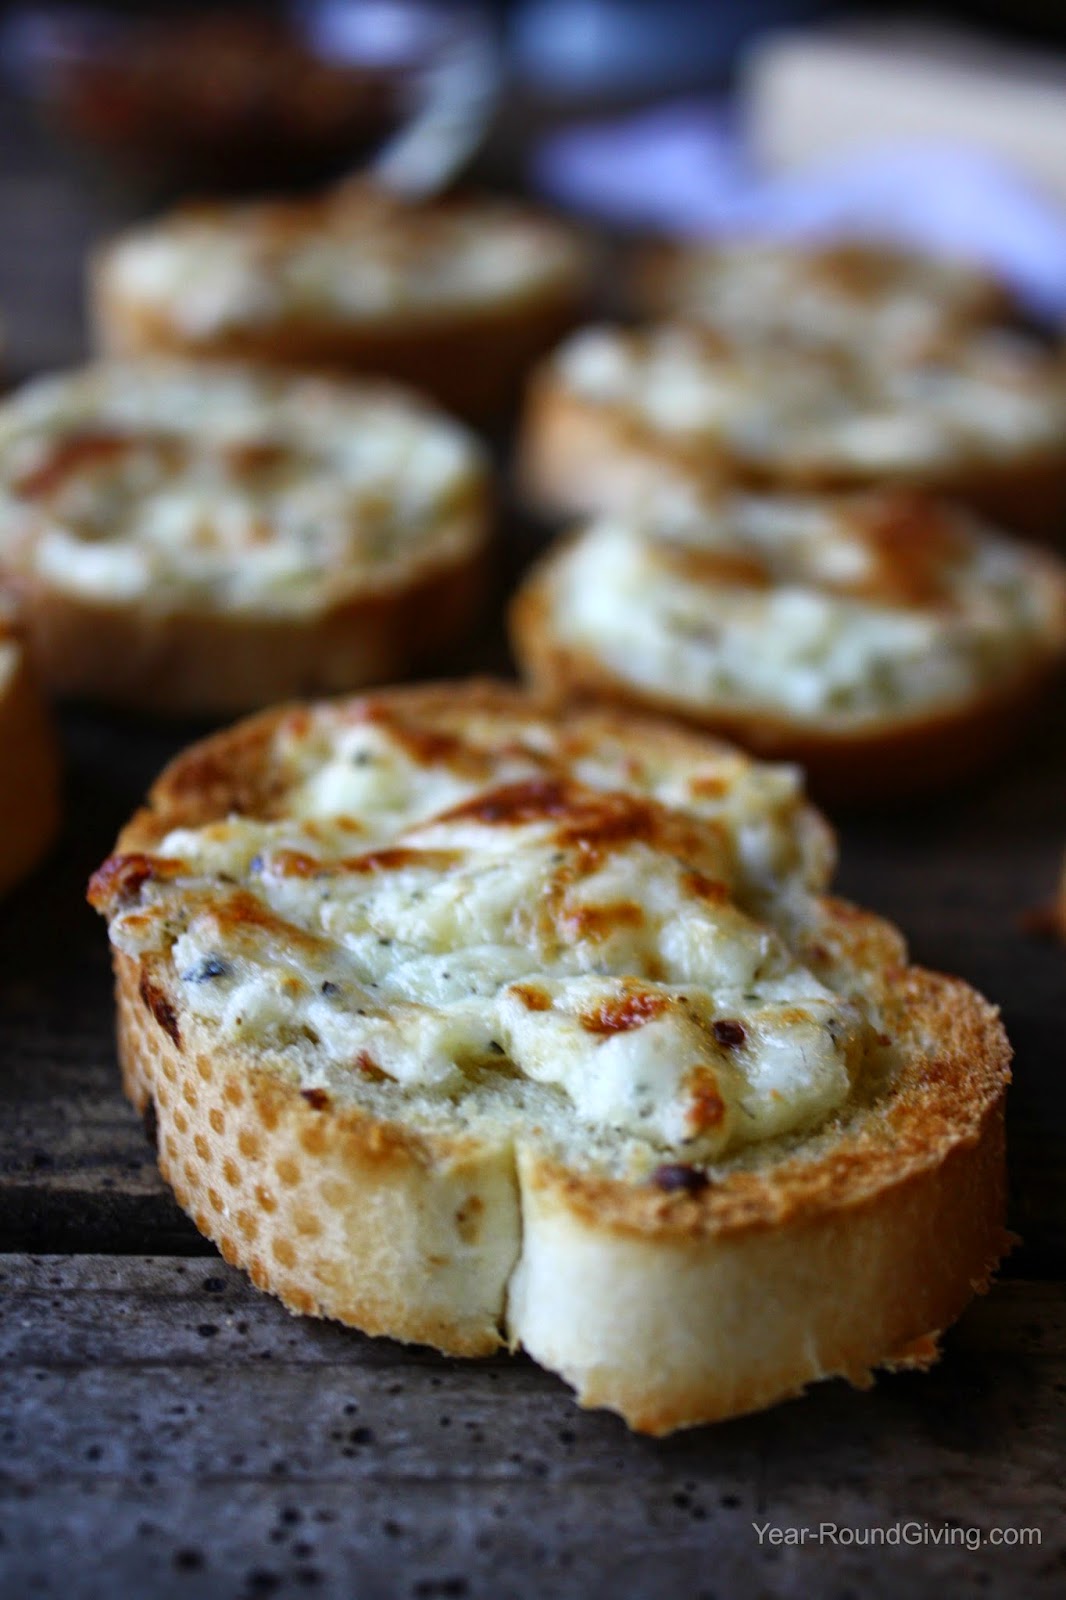 Spicy Cheese Toast